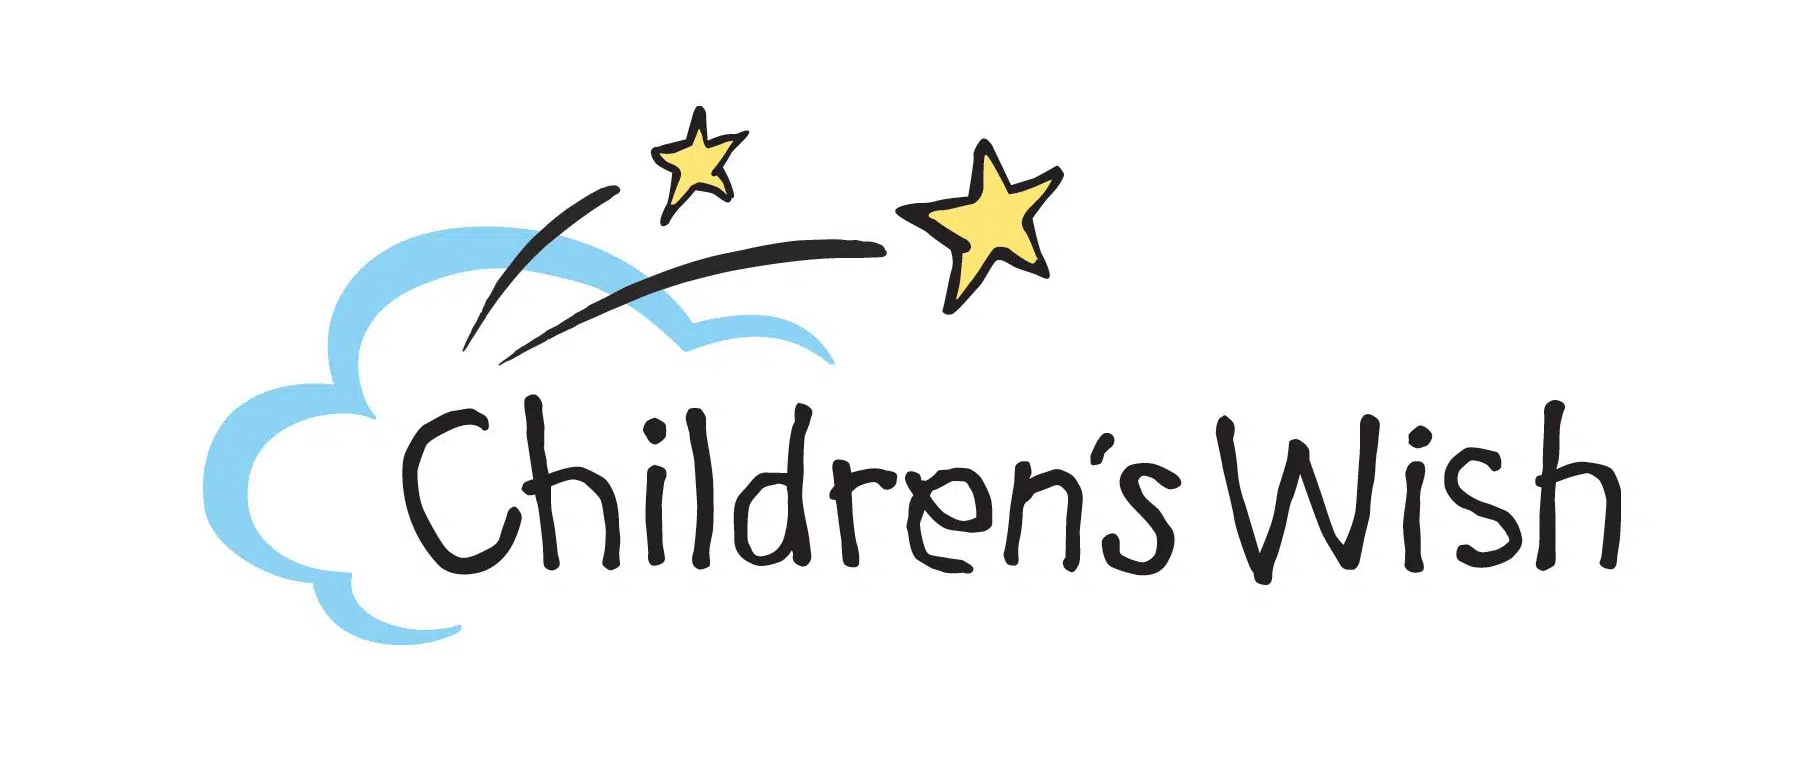 Children's Wish Foundation recently improving the lives of some Kamloops residents